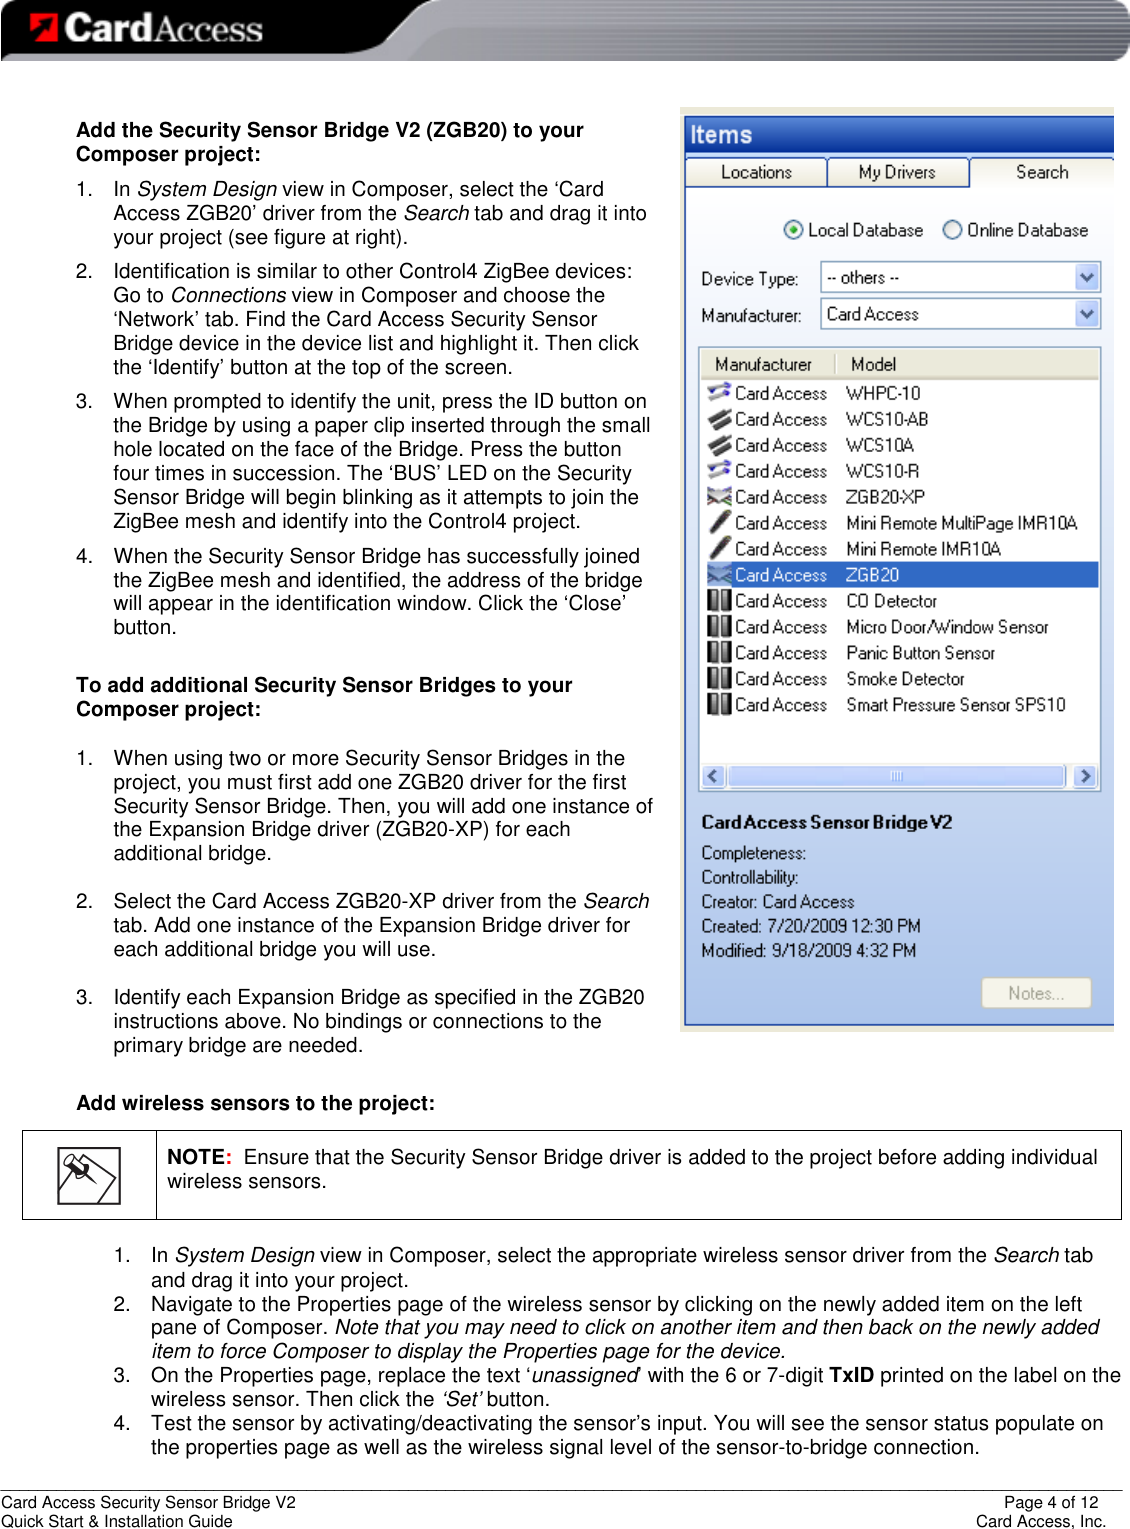   _________________________________________________________________________________________________________________________ Card Access Security Sensor Bridge V2                  Page 4 of 12 Quick Start &amp; Installation Guide      Card Access, Inc.  Add the Security Sensor Bridge V2 (ZGB20) to your Composer project: 1.  In System Design view in Composer, select the ‘Card Access ZGB20’ driver from the Search tab and drag it into your project (see figure at right). 2.  Identification is similar to other Control4 ZigBee devices: Go to Connections view in Composer and choose the ‘Network’ tab. Find the Card Access Security Sensor Bridge device in the device list and highlight it. Then click the ‘Identify’ button at the top of the screen. 3.  When prompted to identify the unit, press the ID button on the Bridge by using a paper clip inserted through the small hole located on the face of the Bridge. Press the button four times in succession. The ‘BUS’ LED on the Security Sensor Bridge will begin blinking as it attempts to join the ZigBee mesh and identify into the Control4 project. 4.  When the Security Sensor Bridge has successfully joined the ZigBee mesh and identified, the address of the bridge will appear in the identification window. Click the ‘Close’ button.  To add additional Security Sensor Bridges to your Composer project:  1.  When using two or more Security Sensor Bridges in the project, you must first add one ZGB20 driver for the first Security Sensor Bridge. Then, you will add one instance of the Expansion Bridge driver (ZGB20-XP) for each additional bridge.   2.  Select the Card Access ZGB20-XP driver from the Search tab. Add one instance of the Expansion Bridge driver for each additional bridge you will use.  3.  Identify each Expansion Bridge as specified in the ZGB20 instructions above. No bindings or connections to the primary bridge are needed.  Add wireless sensors to the project:  1.  In System Design view in Composer, select the appropriate wireless sensor driver from the Search tab and drag it into your project. 2.  Navigate to the Properties page of the wireless sensor by clicking on the newly added item on the left pane of Composer. Note that you may need to click on another item and then back on the newly added item to force Composer to display the Properties page for the device.  3.  On the Properties page, replace the text ‘unassigned’ with the 6 or 7-digit TxID printed on the label on the wireless sensor. Then click the ‘Set’ button. 4.  Test the sensor by activating/deactivating the sensor’s input. You will see the sensor status populate on the properties page as well as the wireless signal level of the sensor-to-bridge connection.     NOTE:  Ensure that the Security Sensor Bridge driver is added to the project before adding individual wireless sensors. 